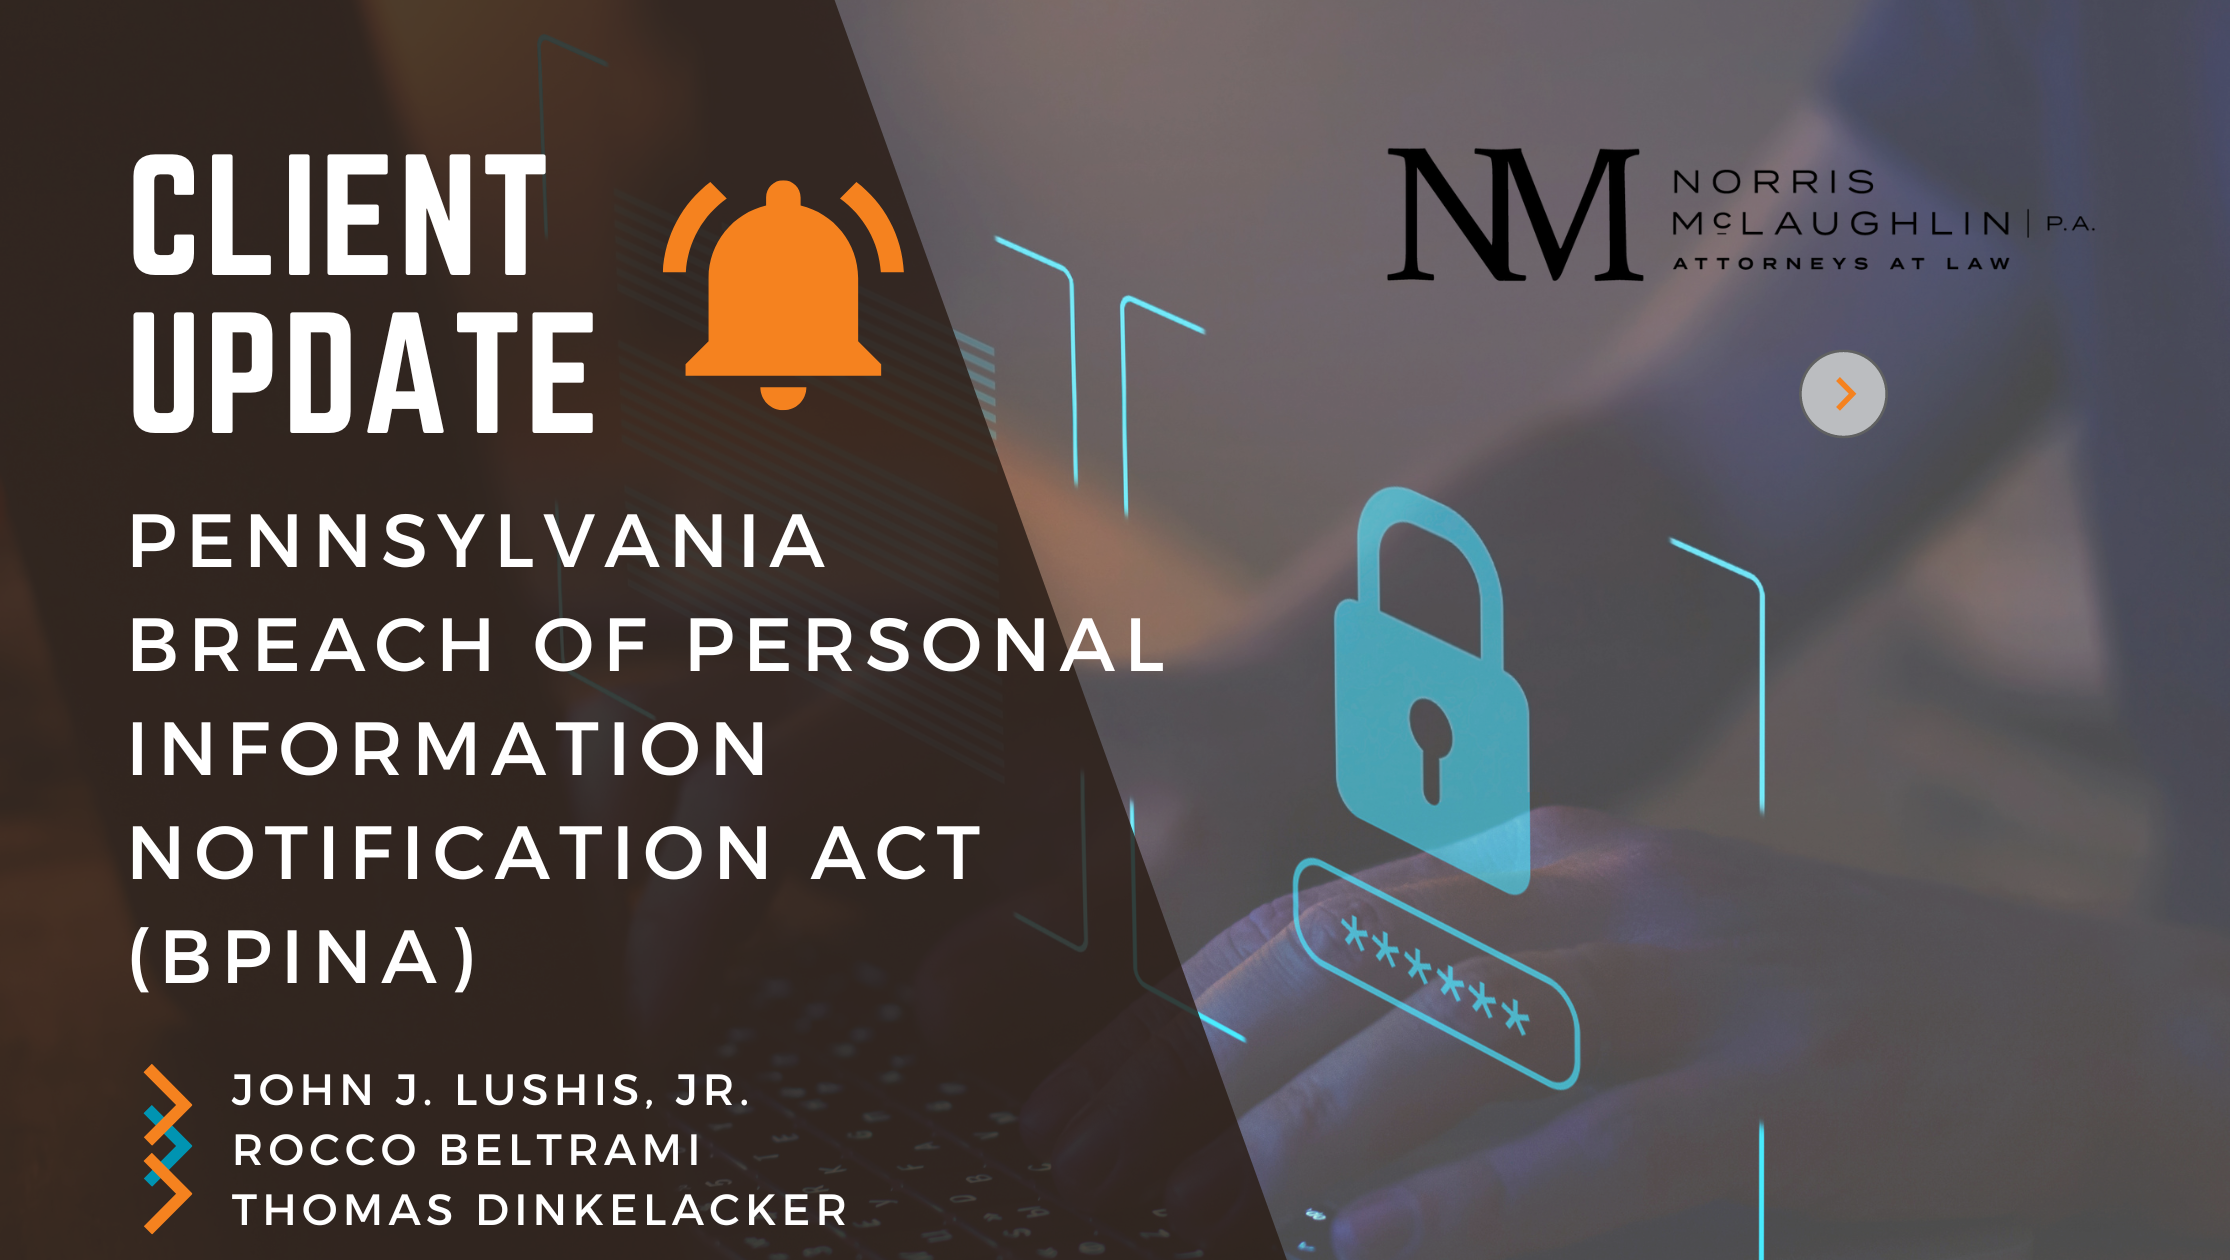 Client Update: Pennsylvania Breach of Personal Information Notification Act (BPINA)